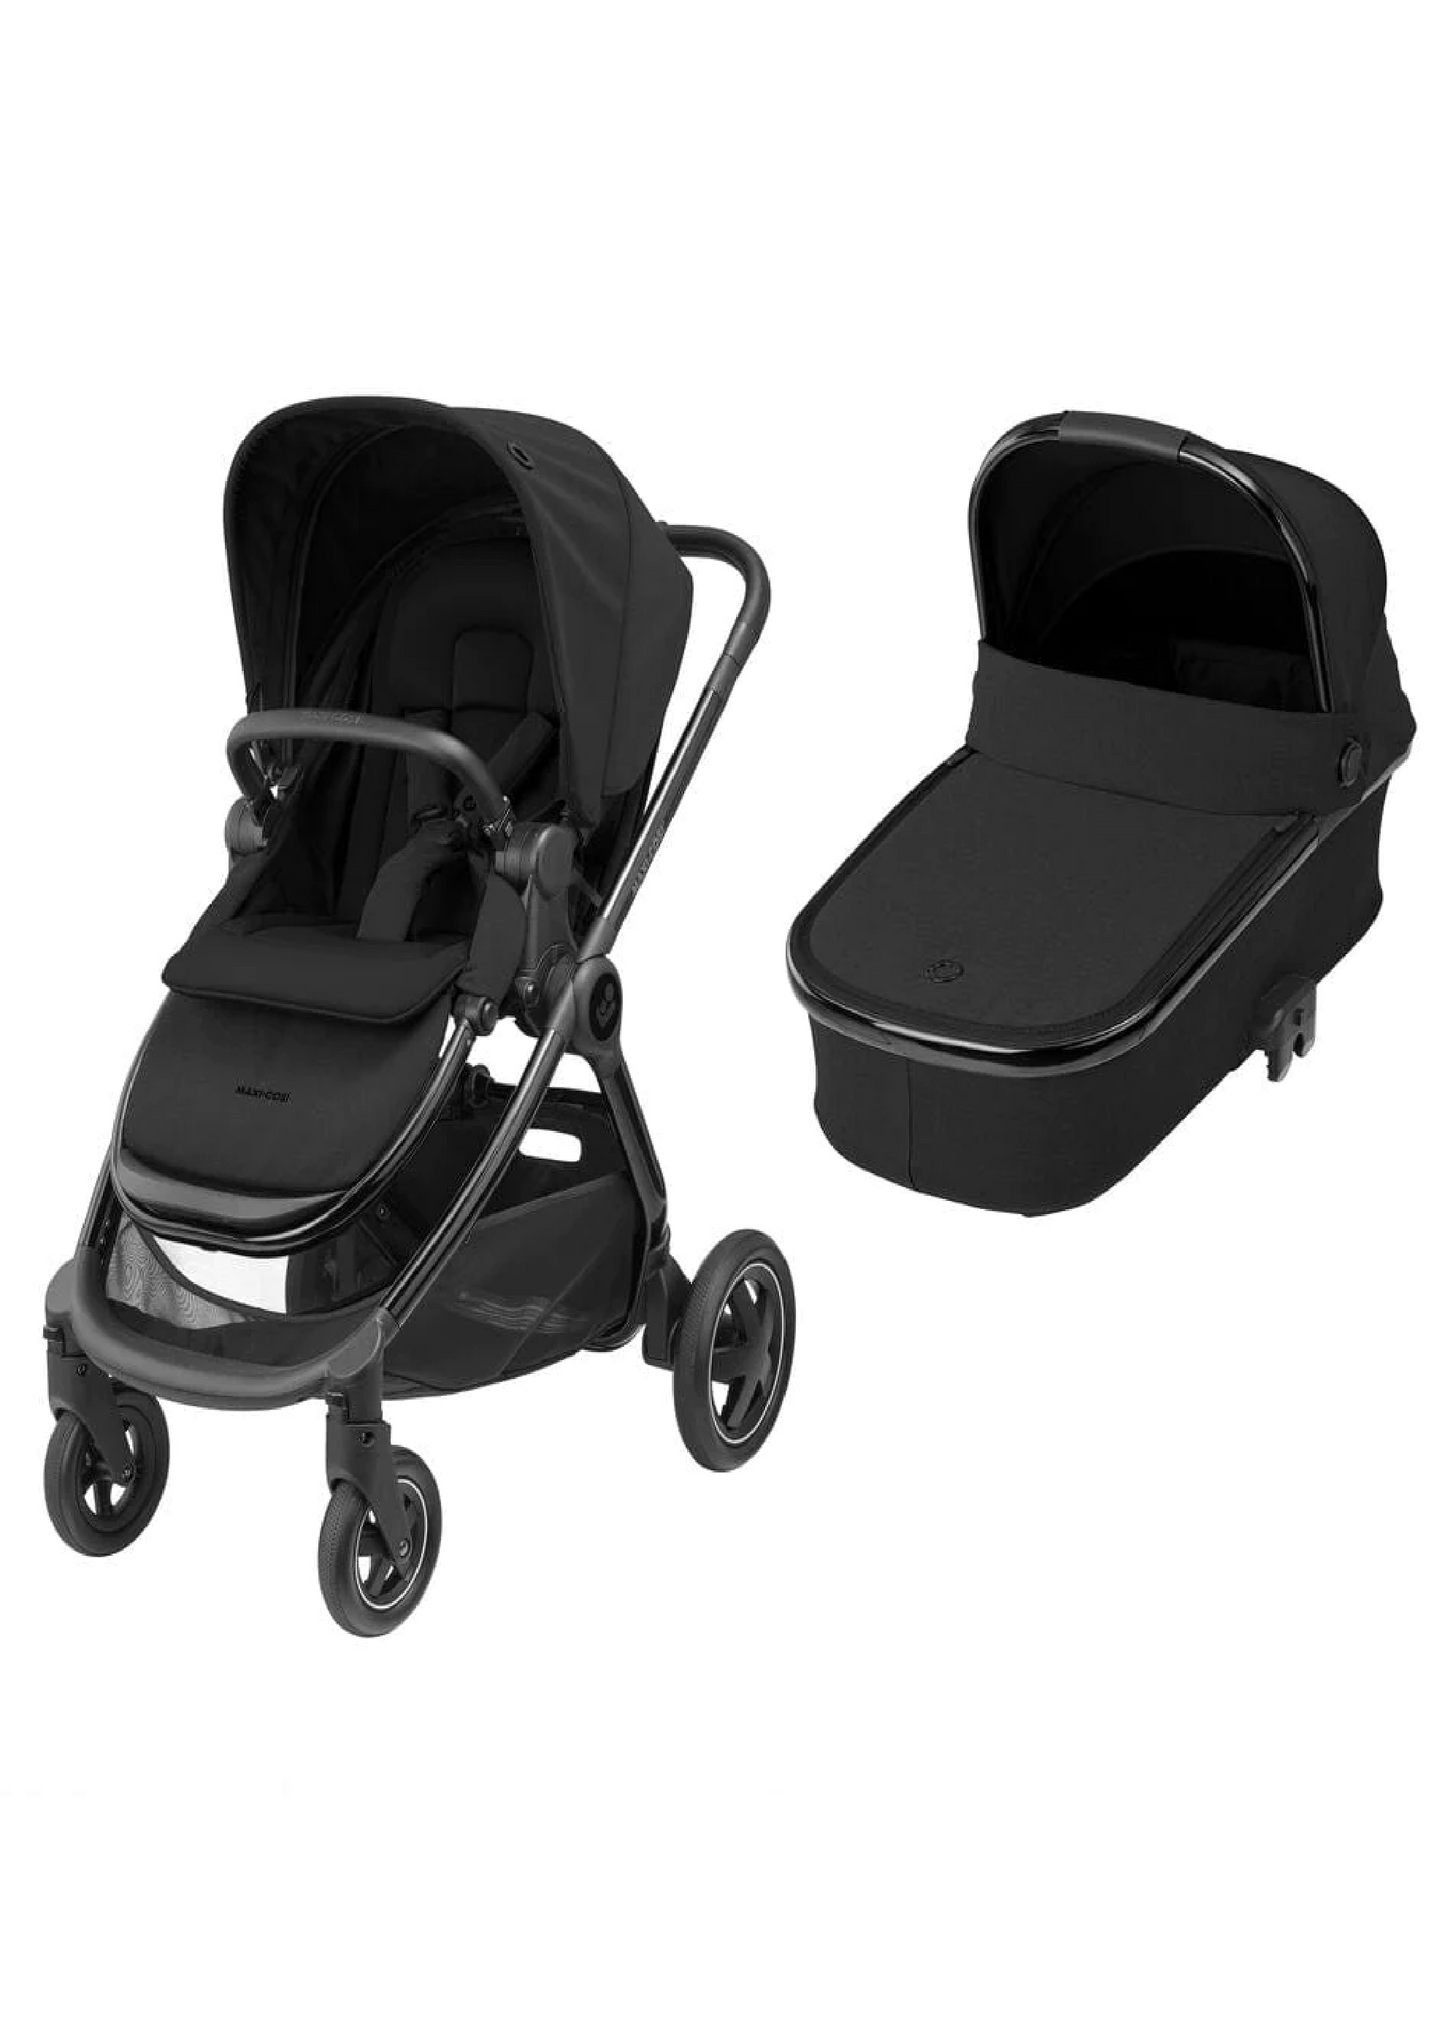 Maxi Cosi Adorra Luxe and Pebble 360 Travel System